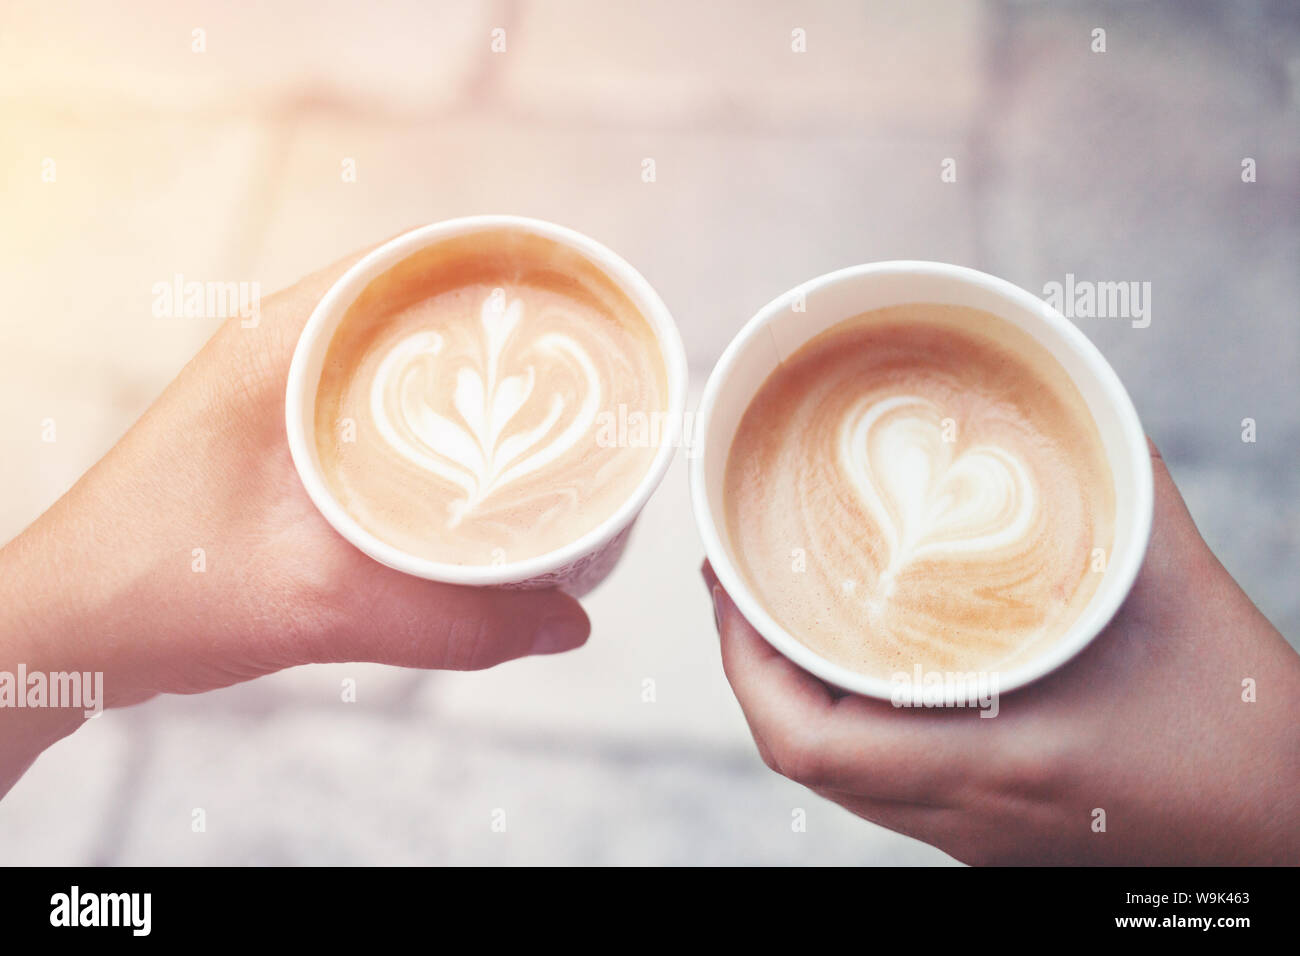 Morning take-away coffee in hands with latte art. Morning cappuccino concept. Top view. Stock Photo